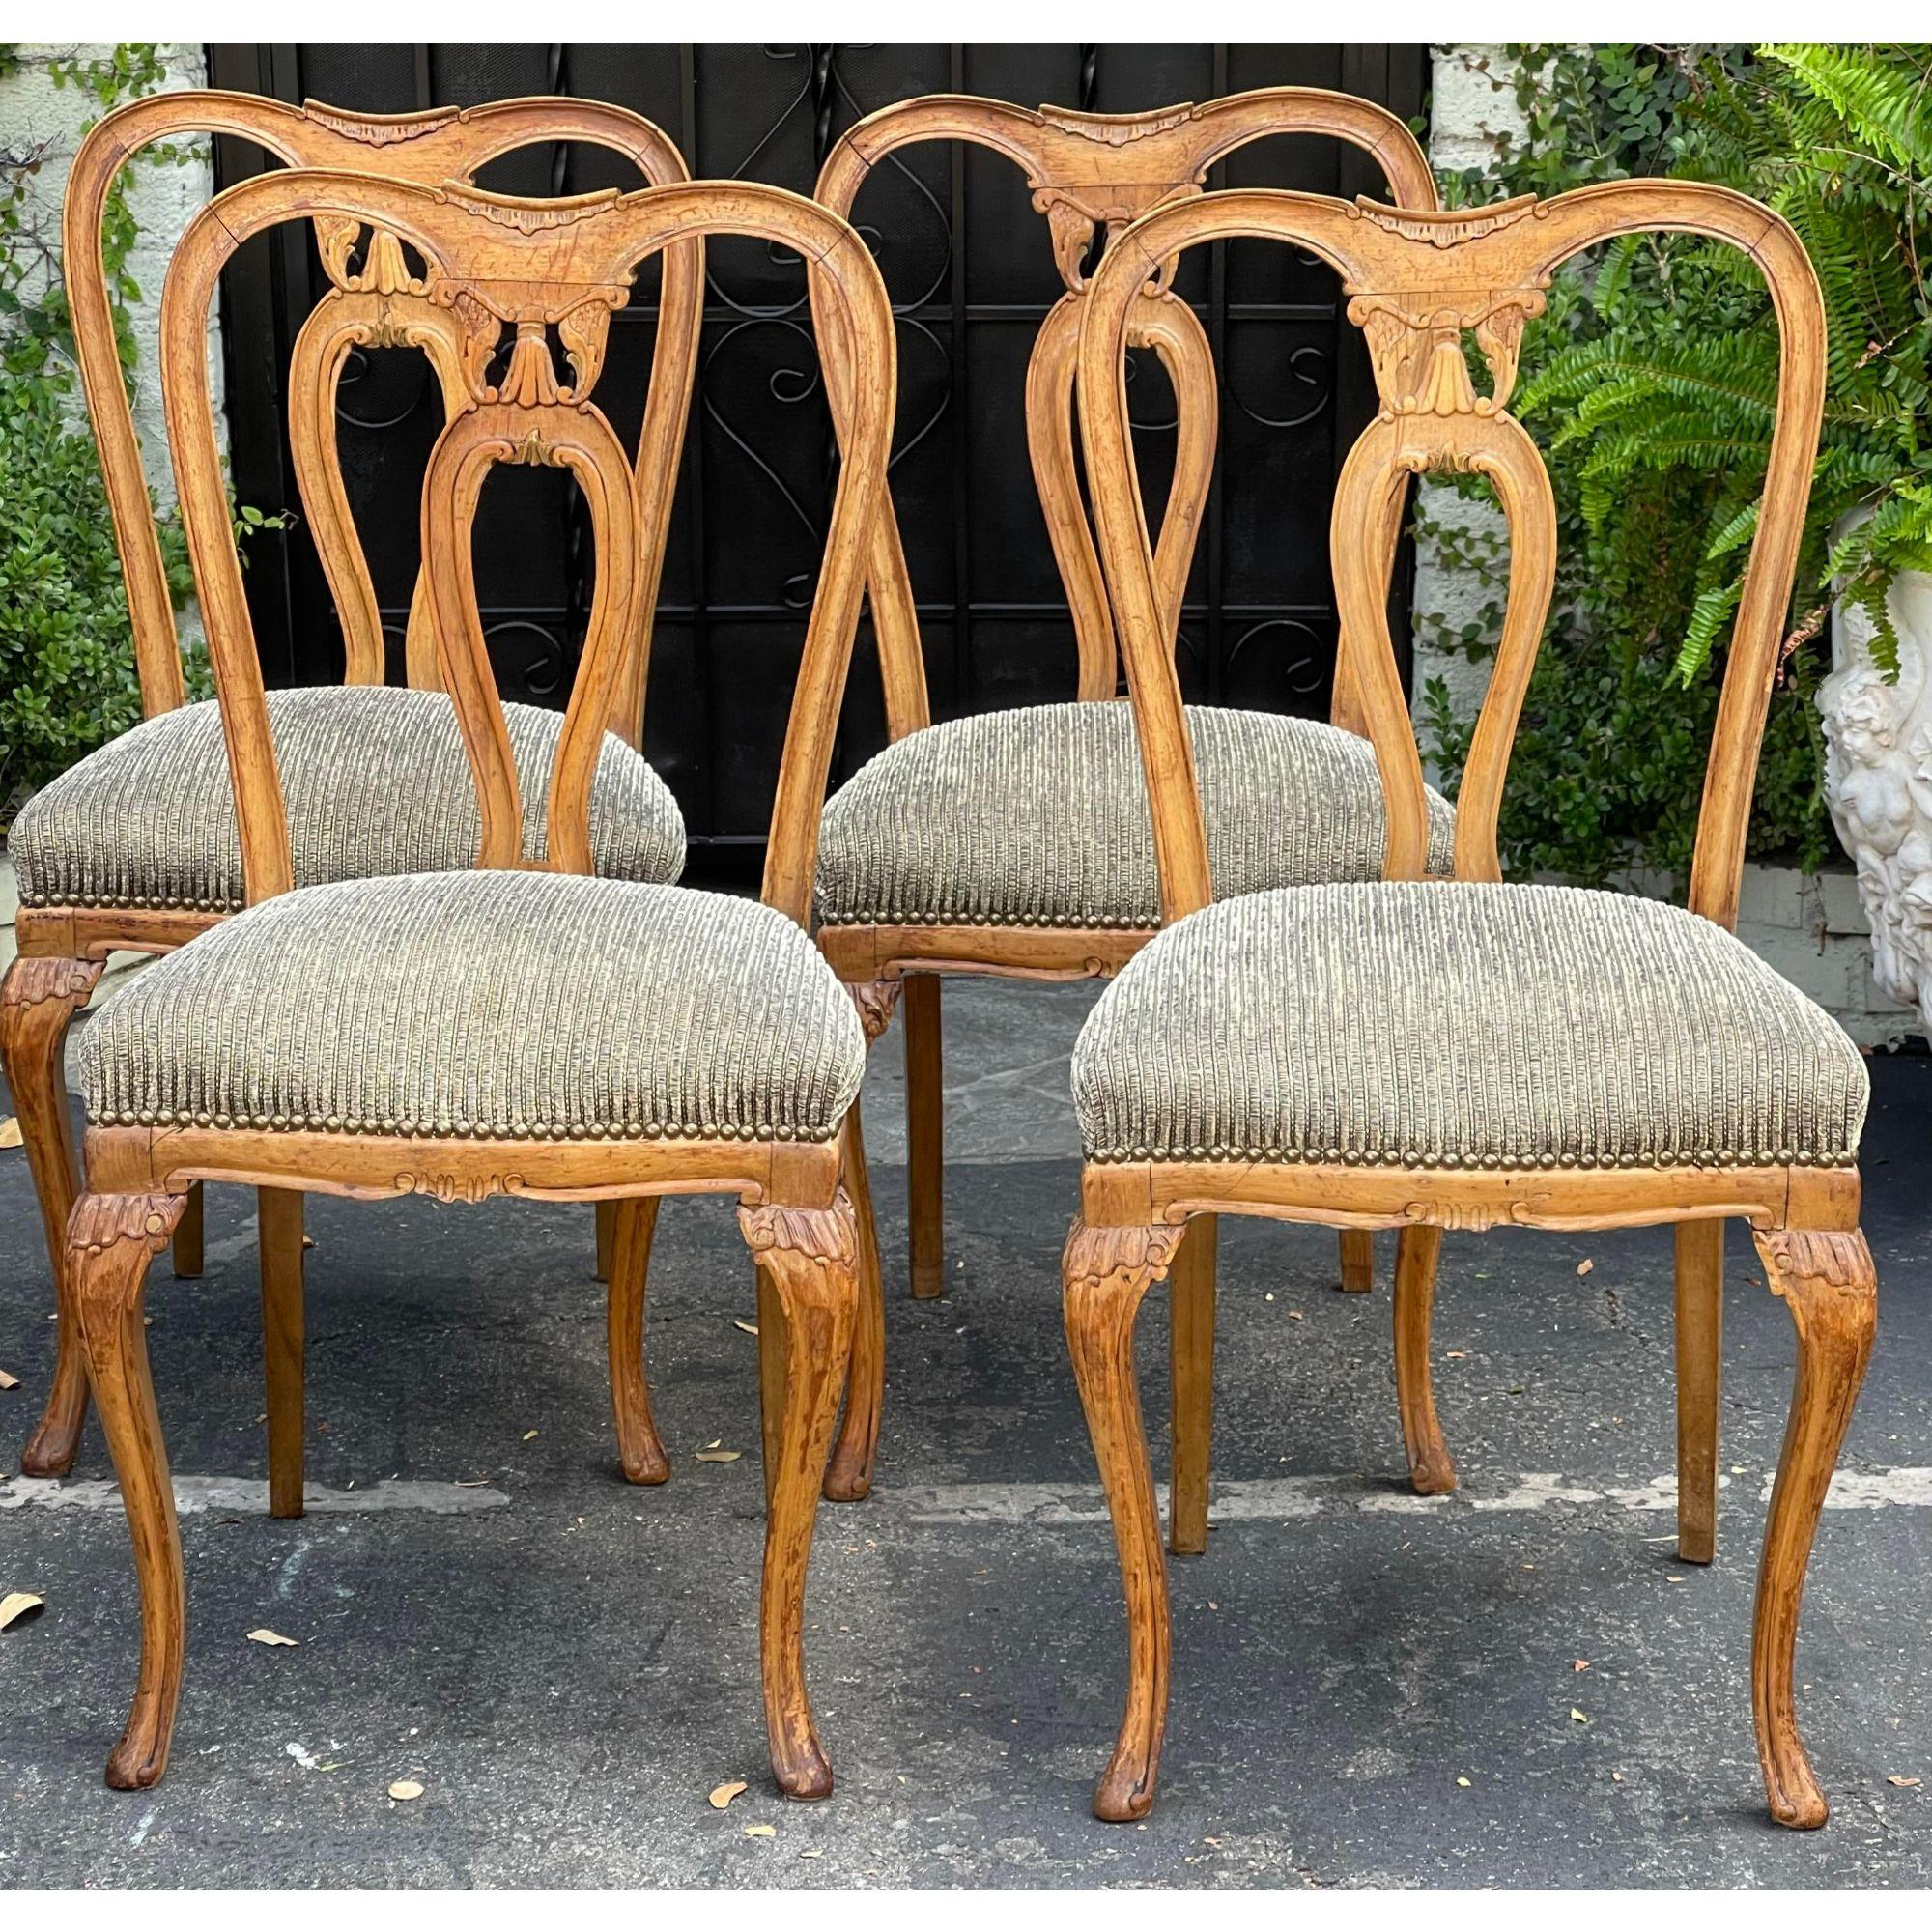 20th Century Set of 4, 19th Century Style Carved Italian Dining Chairs